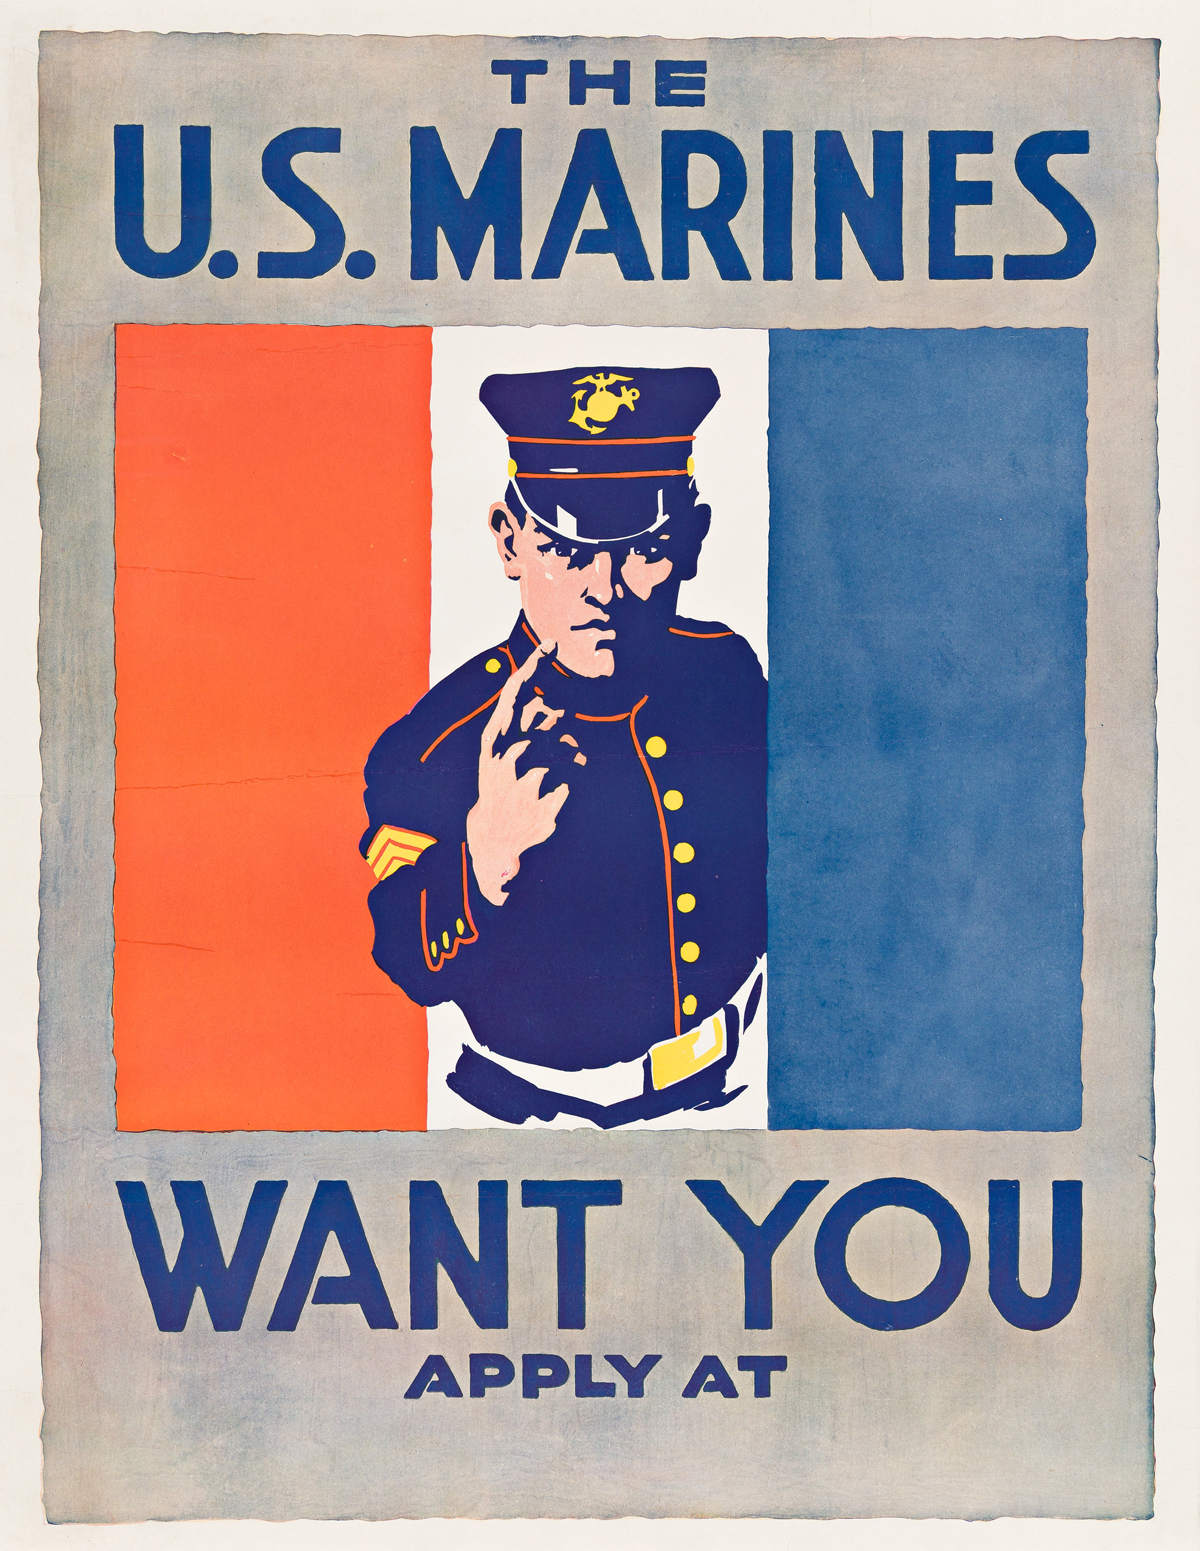 DESIGNER UNKNOWN.  THE U.S. MARINES WANT YOU. Circa 1917. 28x21¾ inches, 71x55¼ cm.